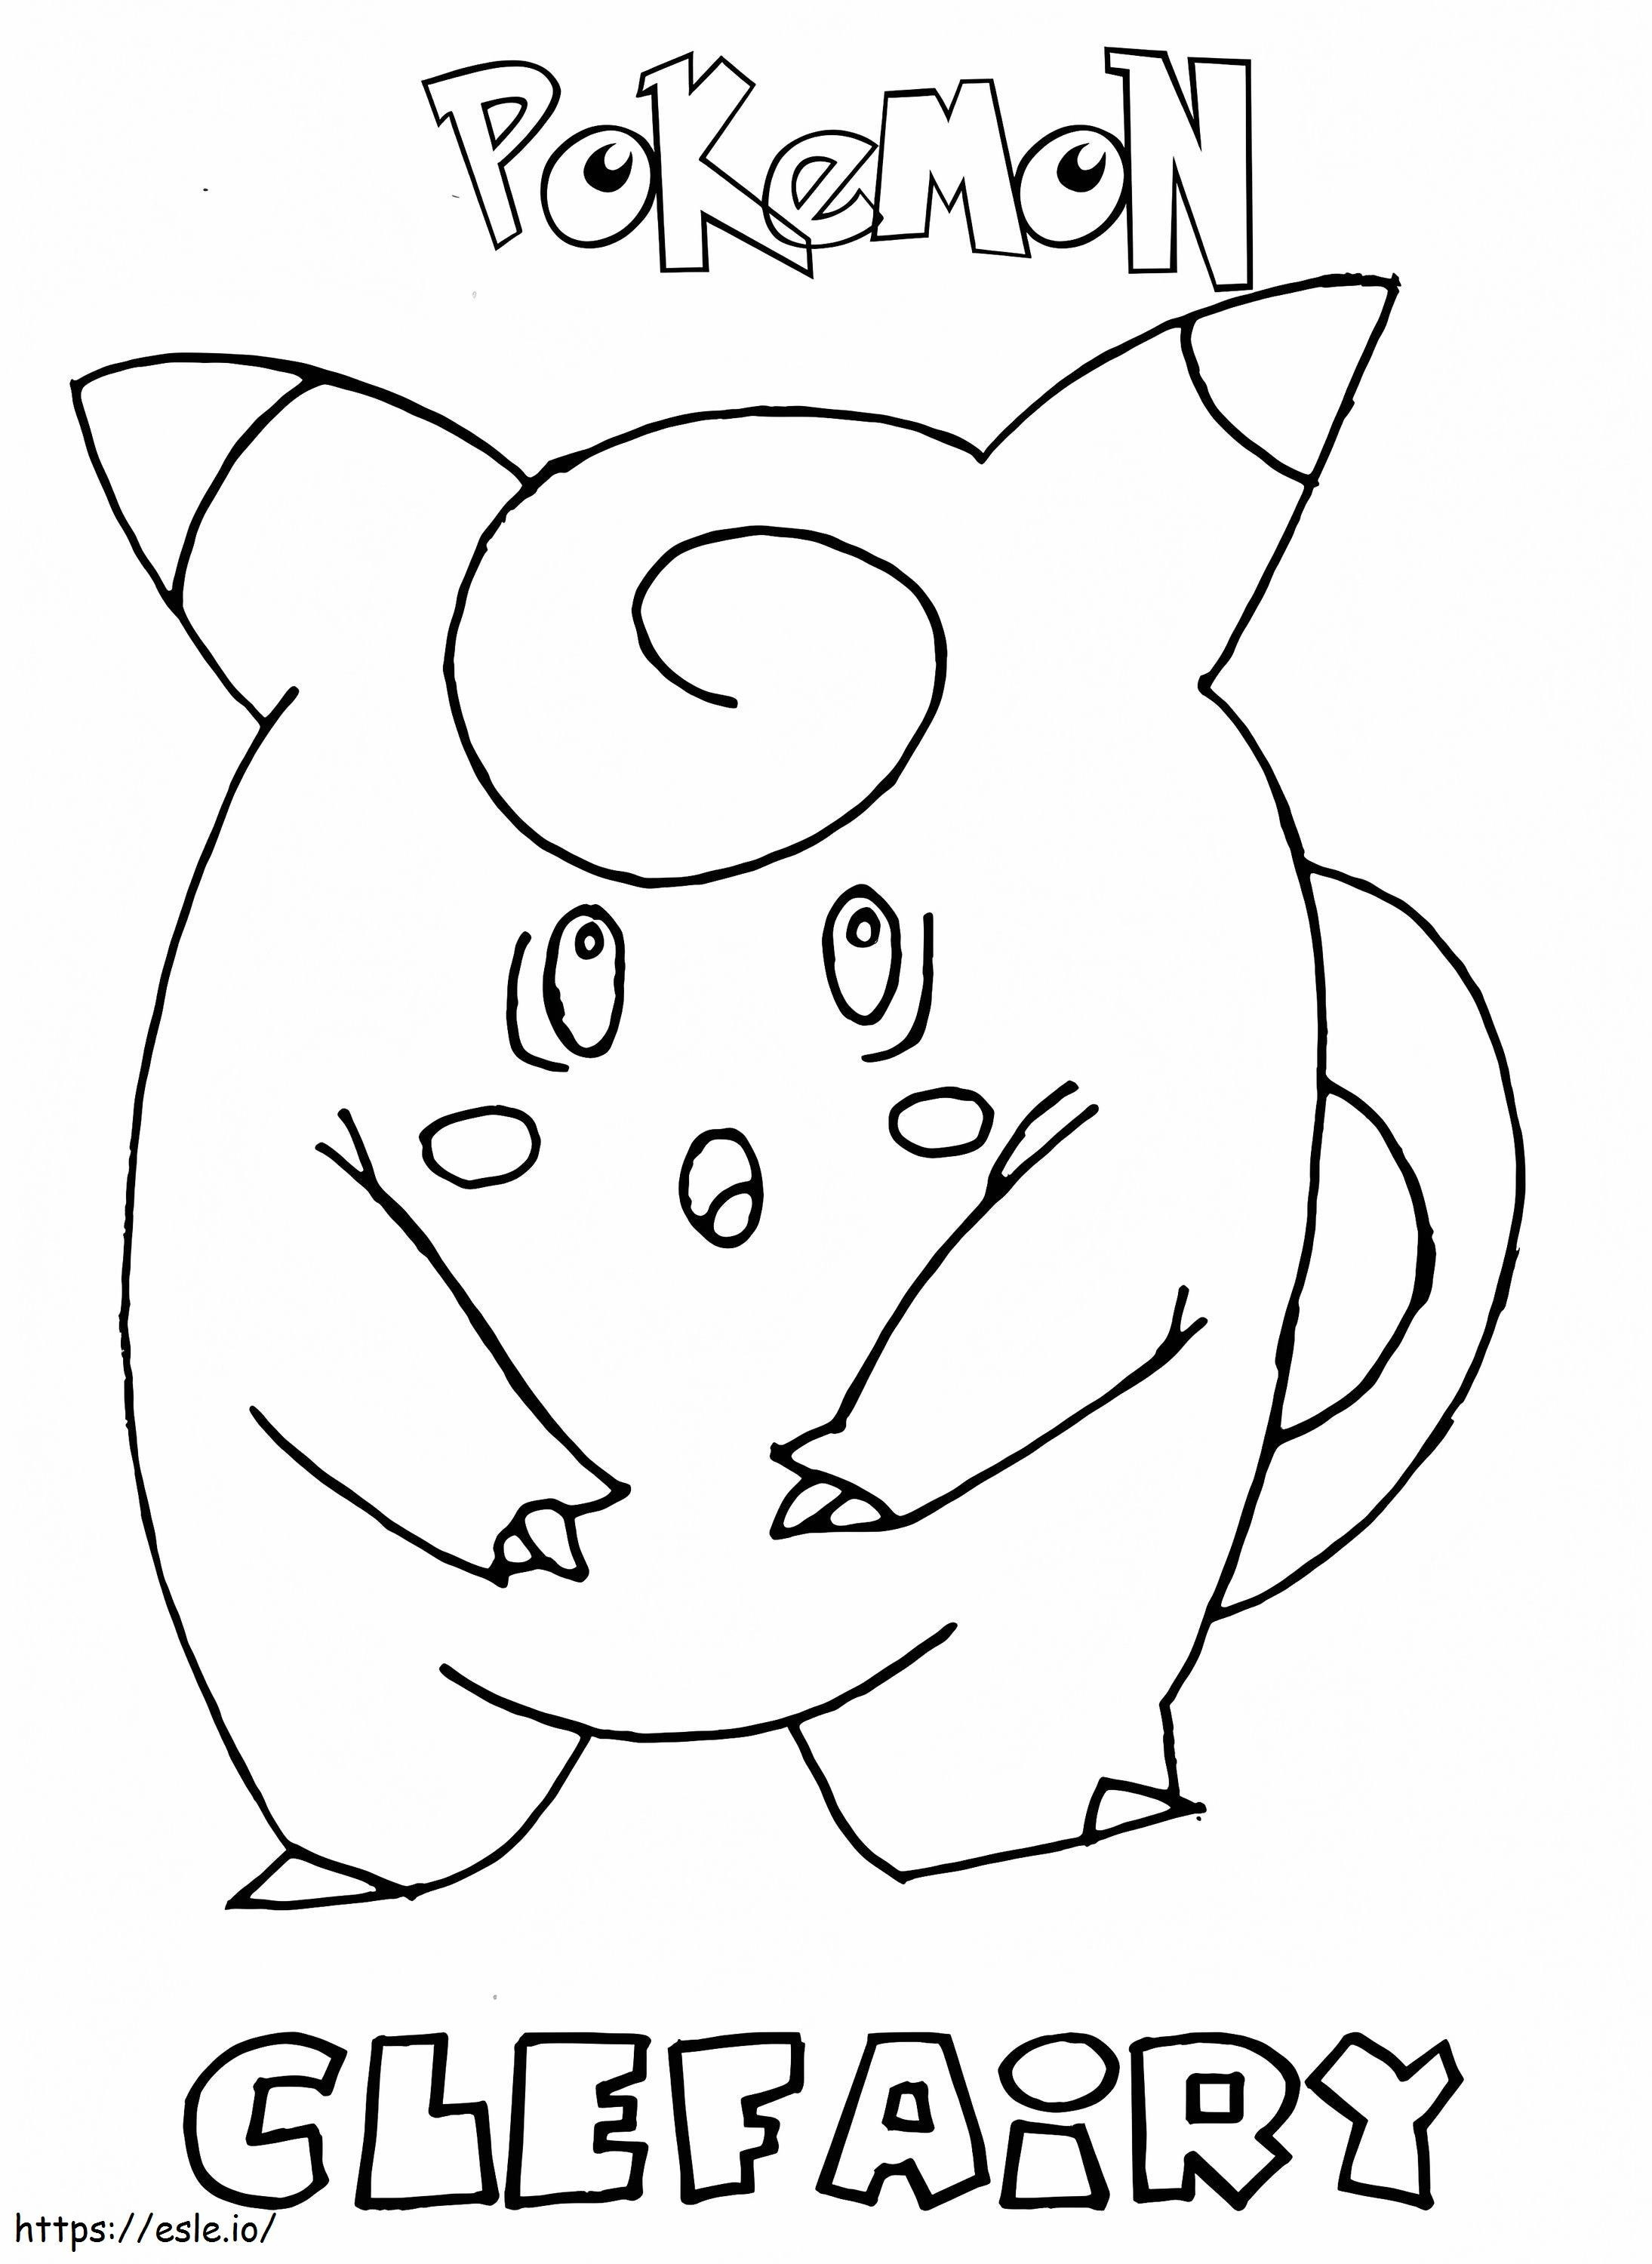 Funny Clefairy coloring page